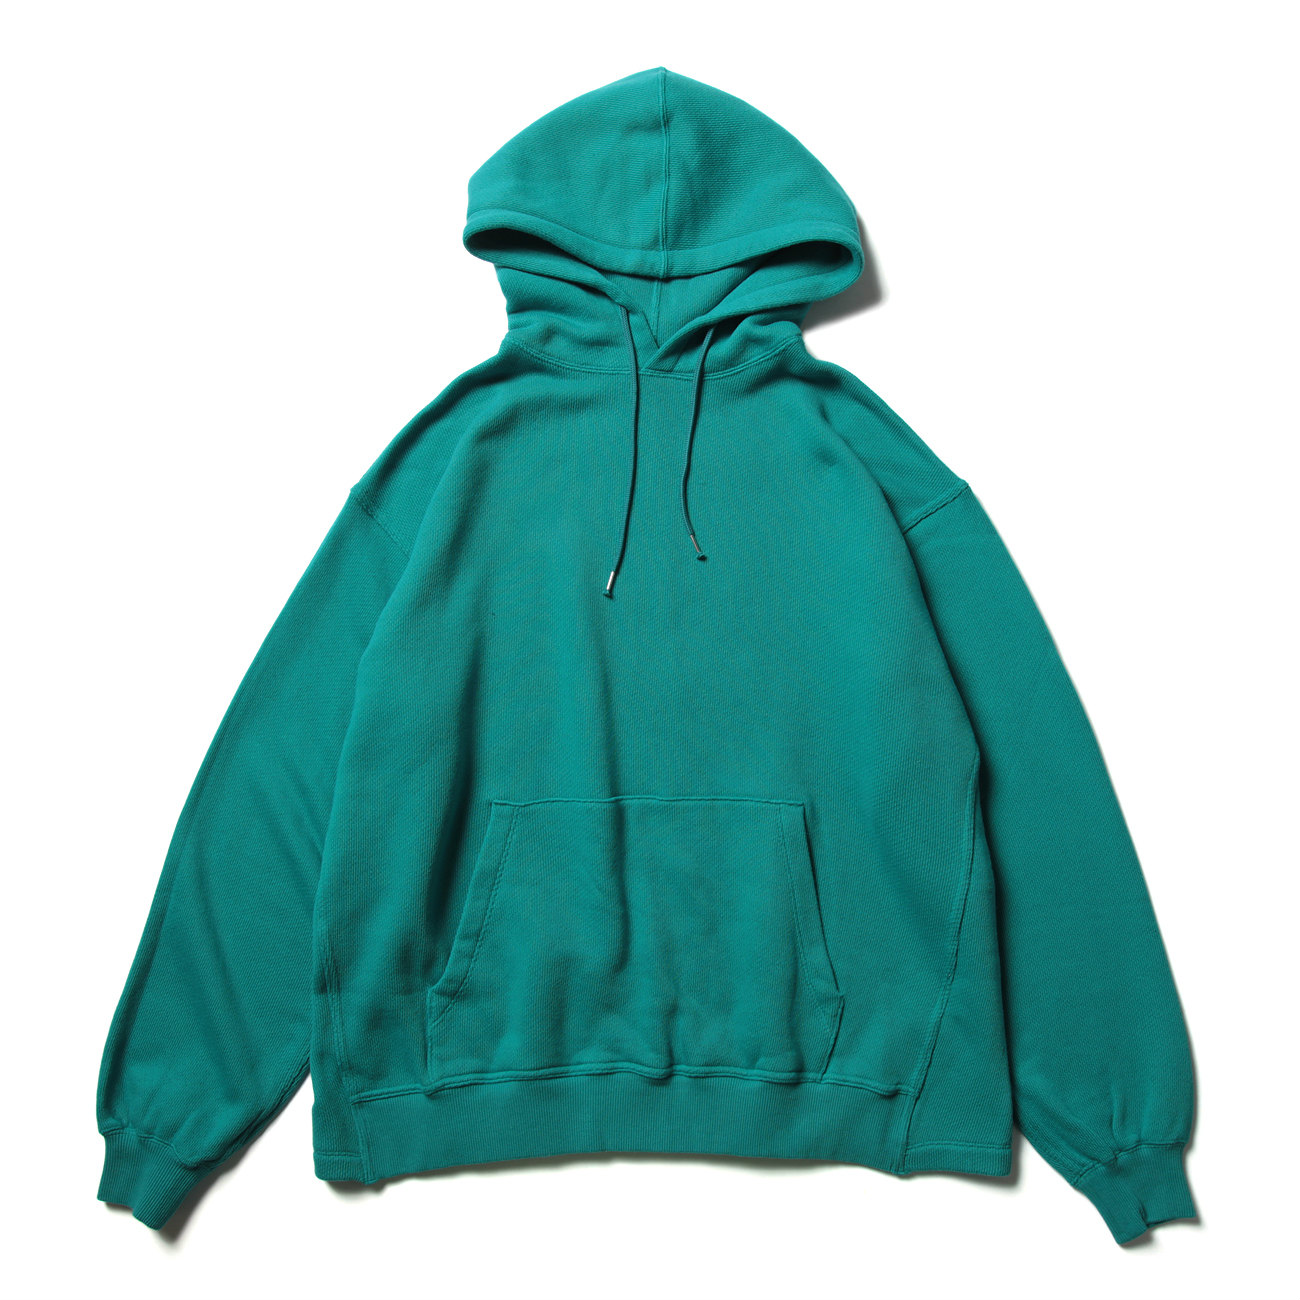 Pull Over Hooded - Turquoise Green